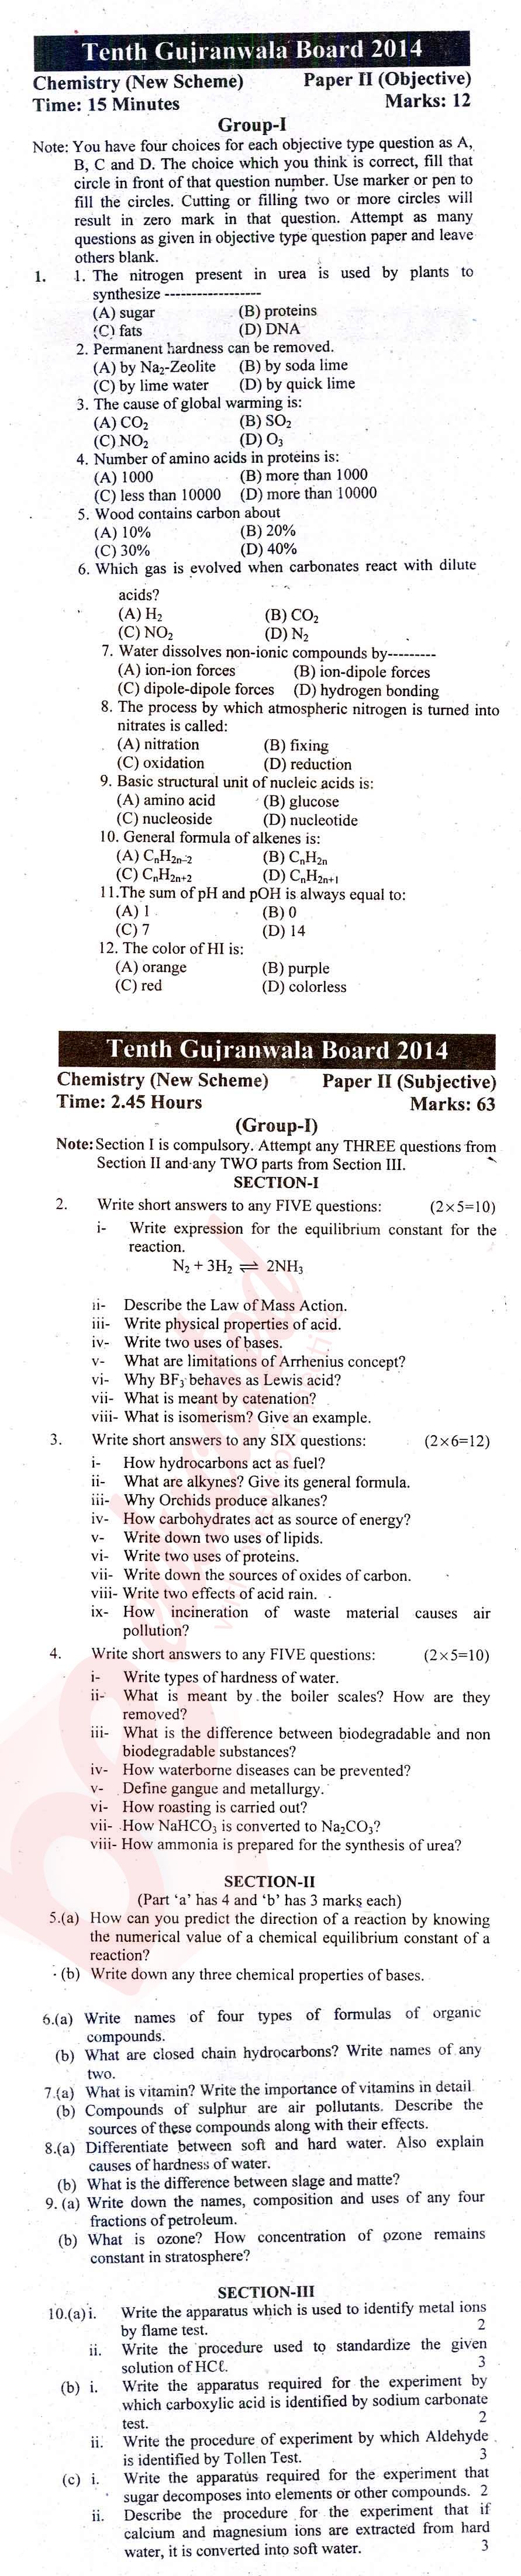 Chemistry 10th English Medium Past Paper Group 1 BISE Gujranwala 2014